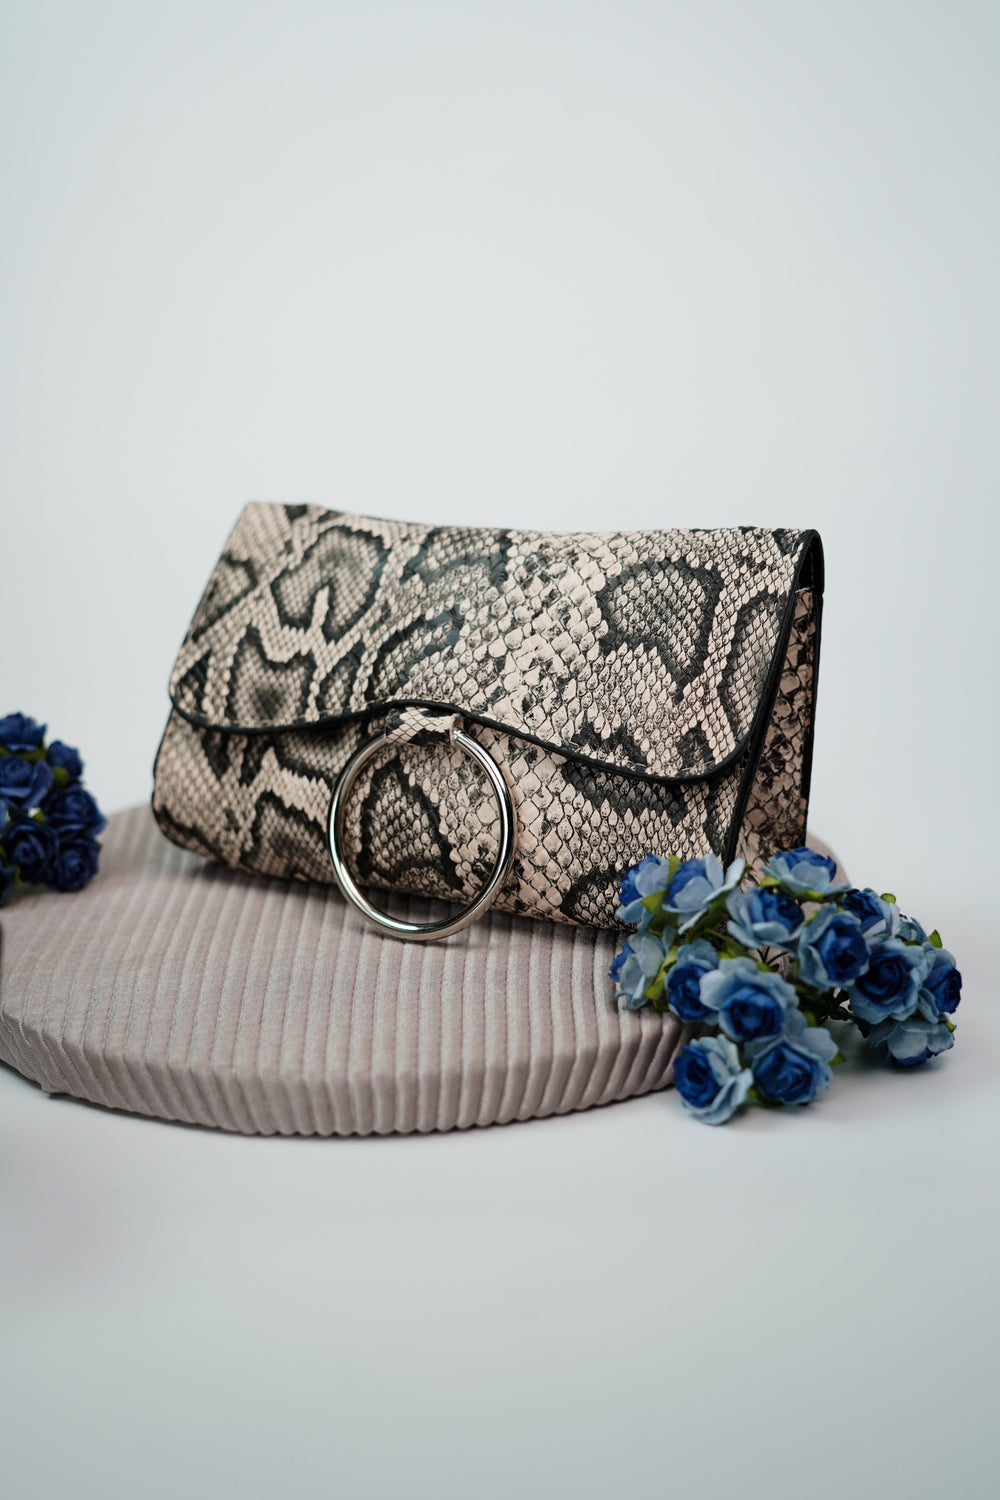 Fashionably Styled Sling Belt Bag Featuring an Exotic Reptile Pattern